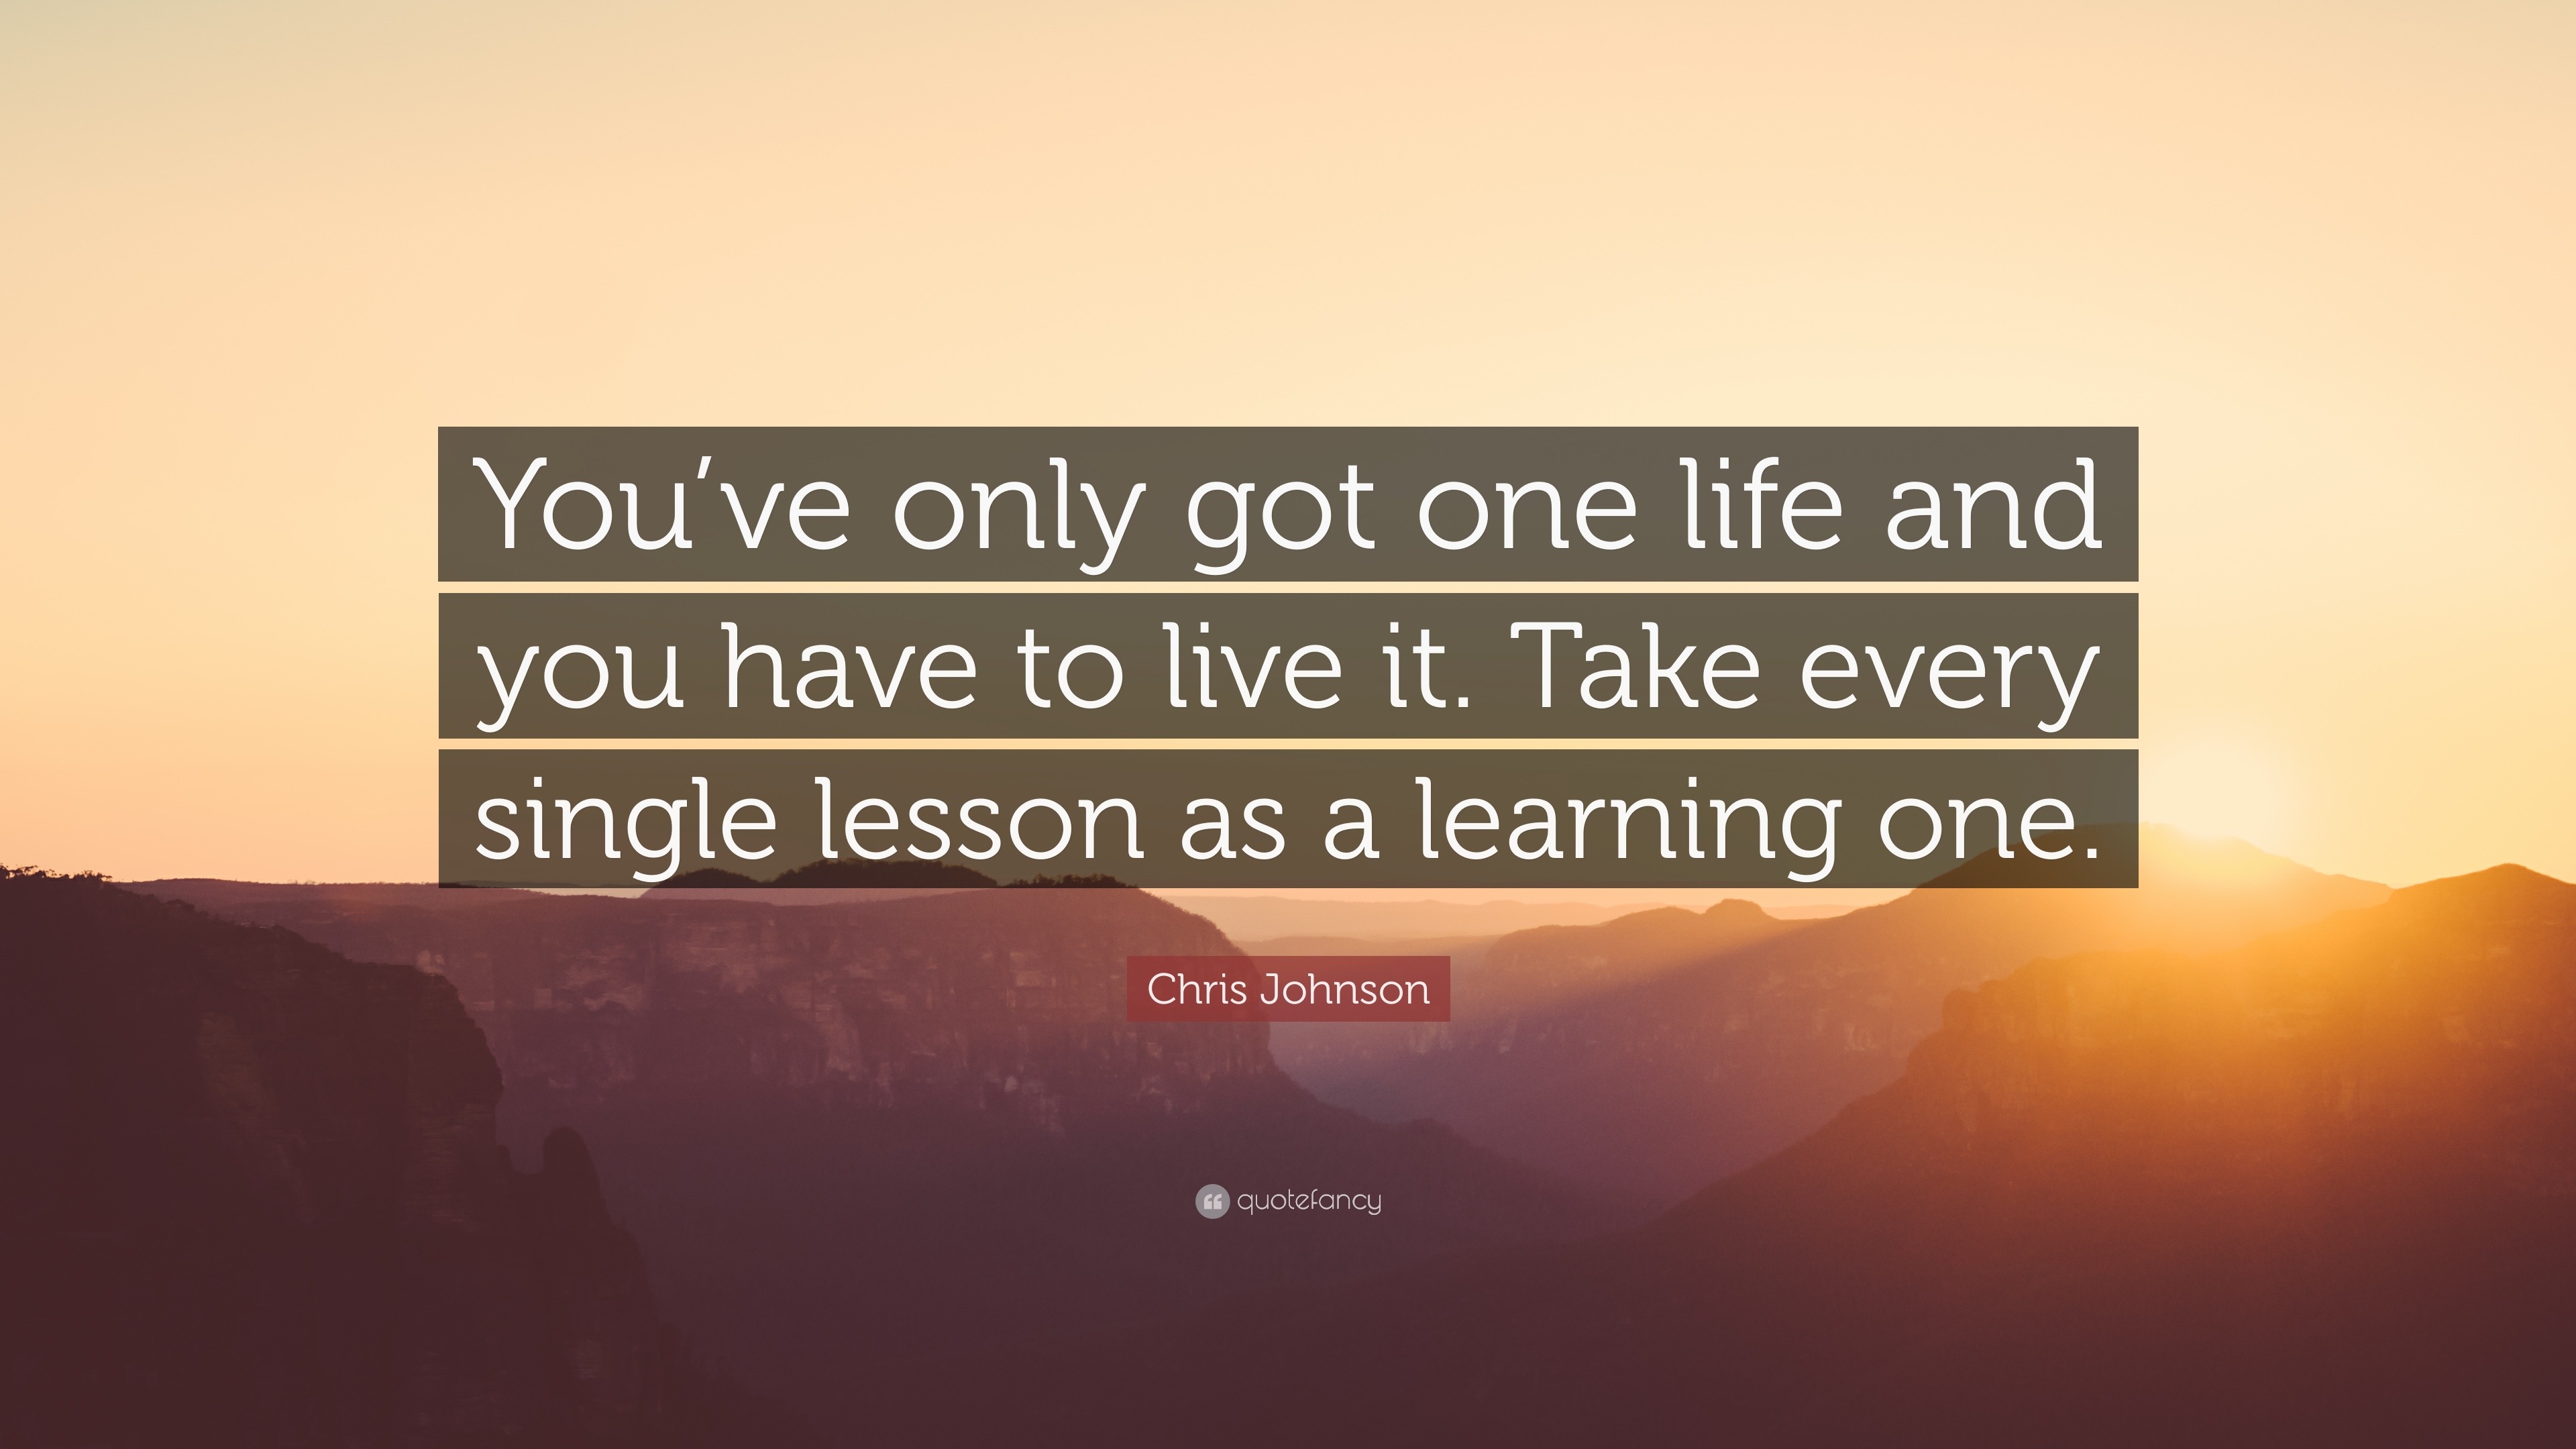 Chris Johnson Quote: "You've only got one life and you ...